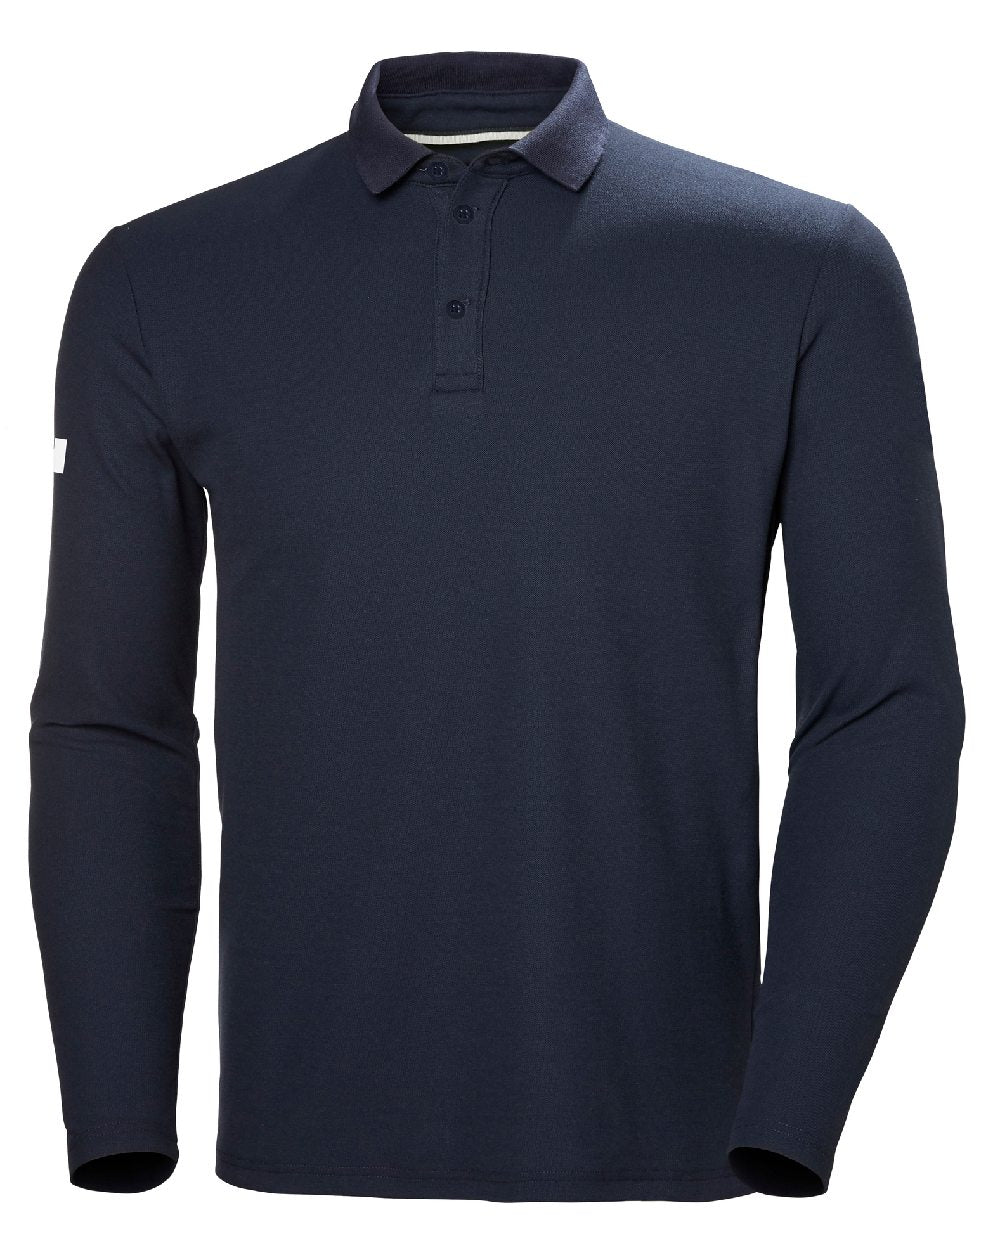 Navy coloured Helly Hansen Mens Crewline Long Sleeves Polo Shirt on white background 